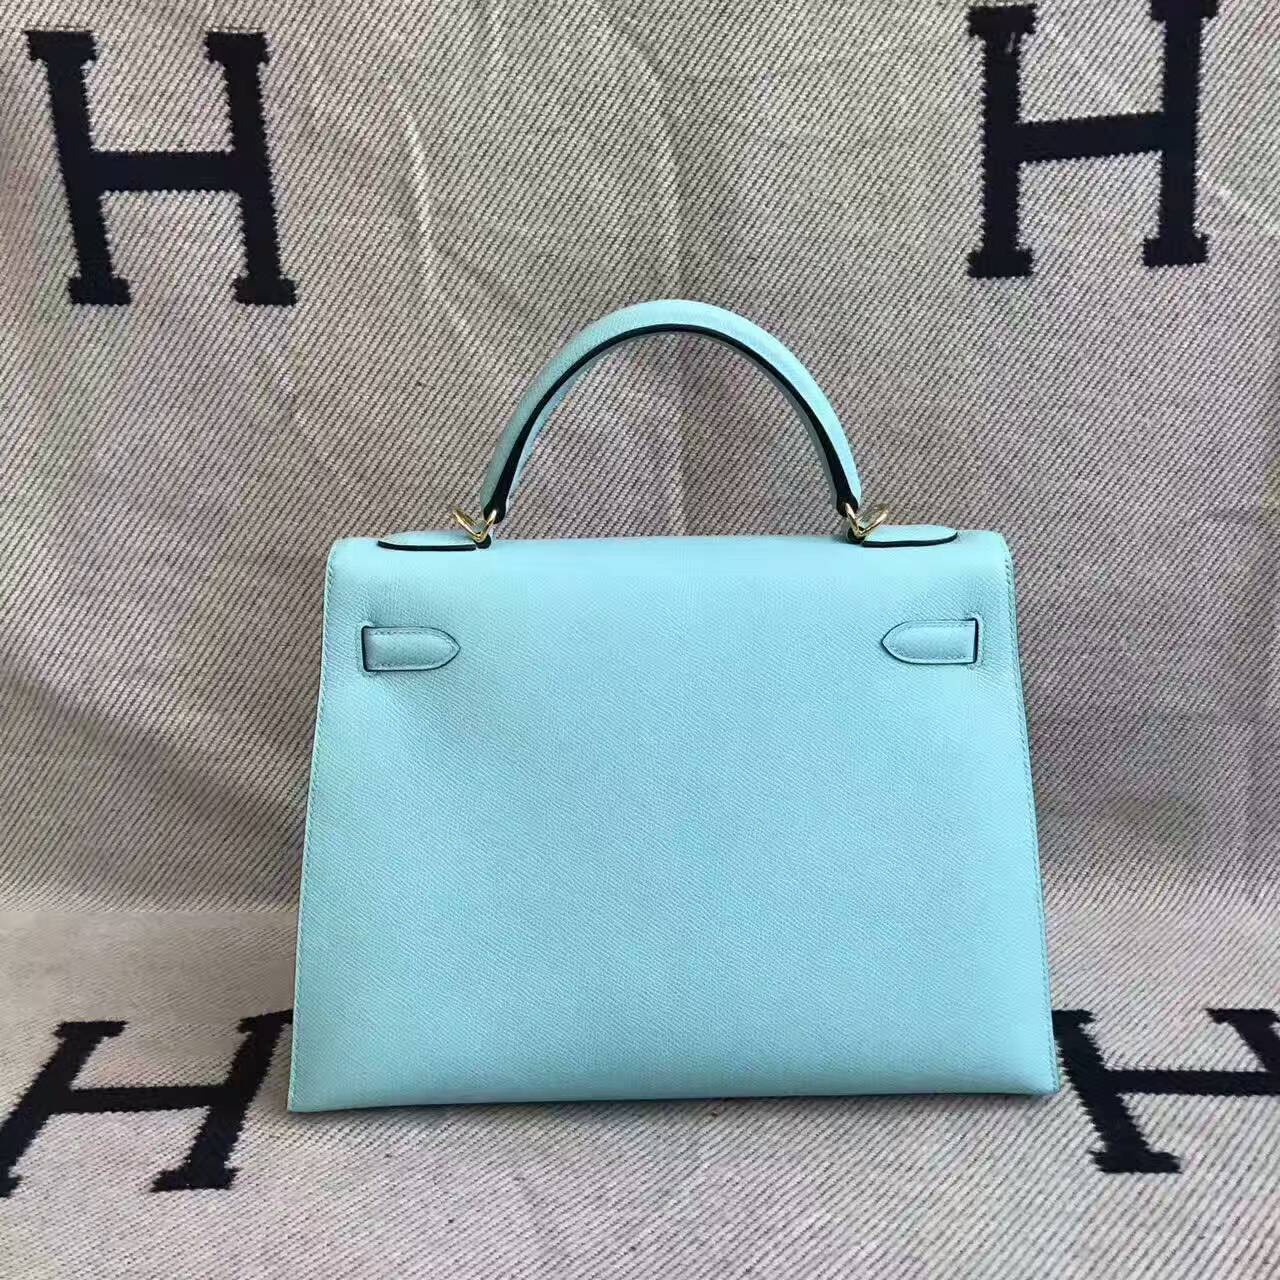 Discount Hermes 3P Blue Attol Epsom Leather Sellier Kelly Bag 32CM